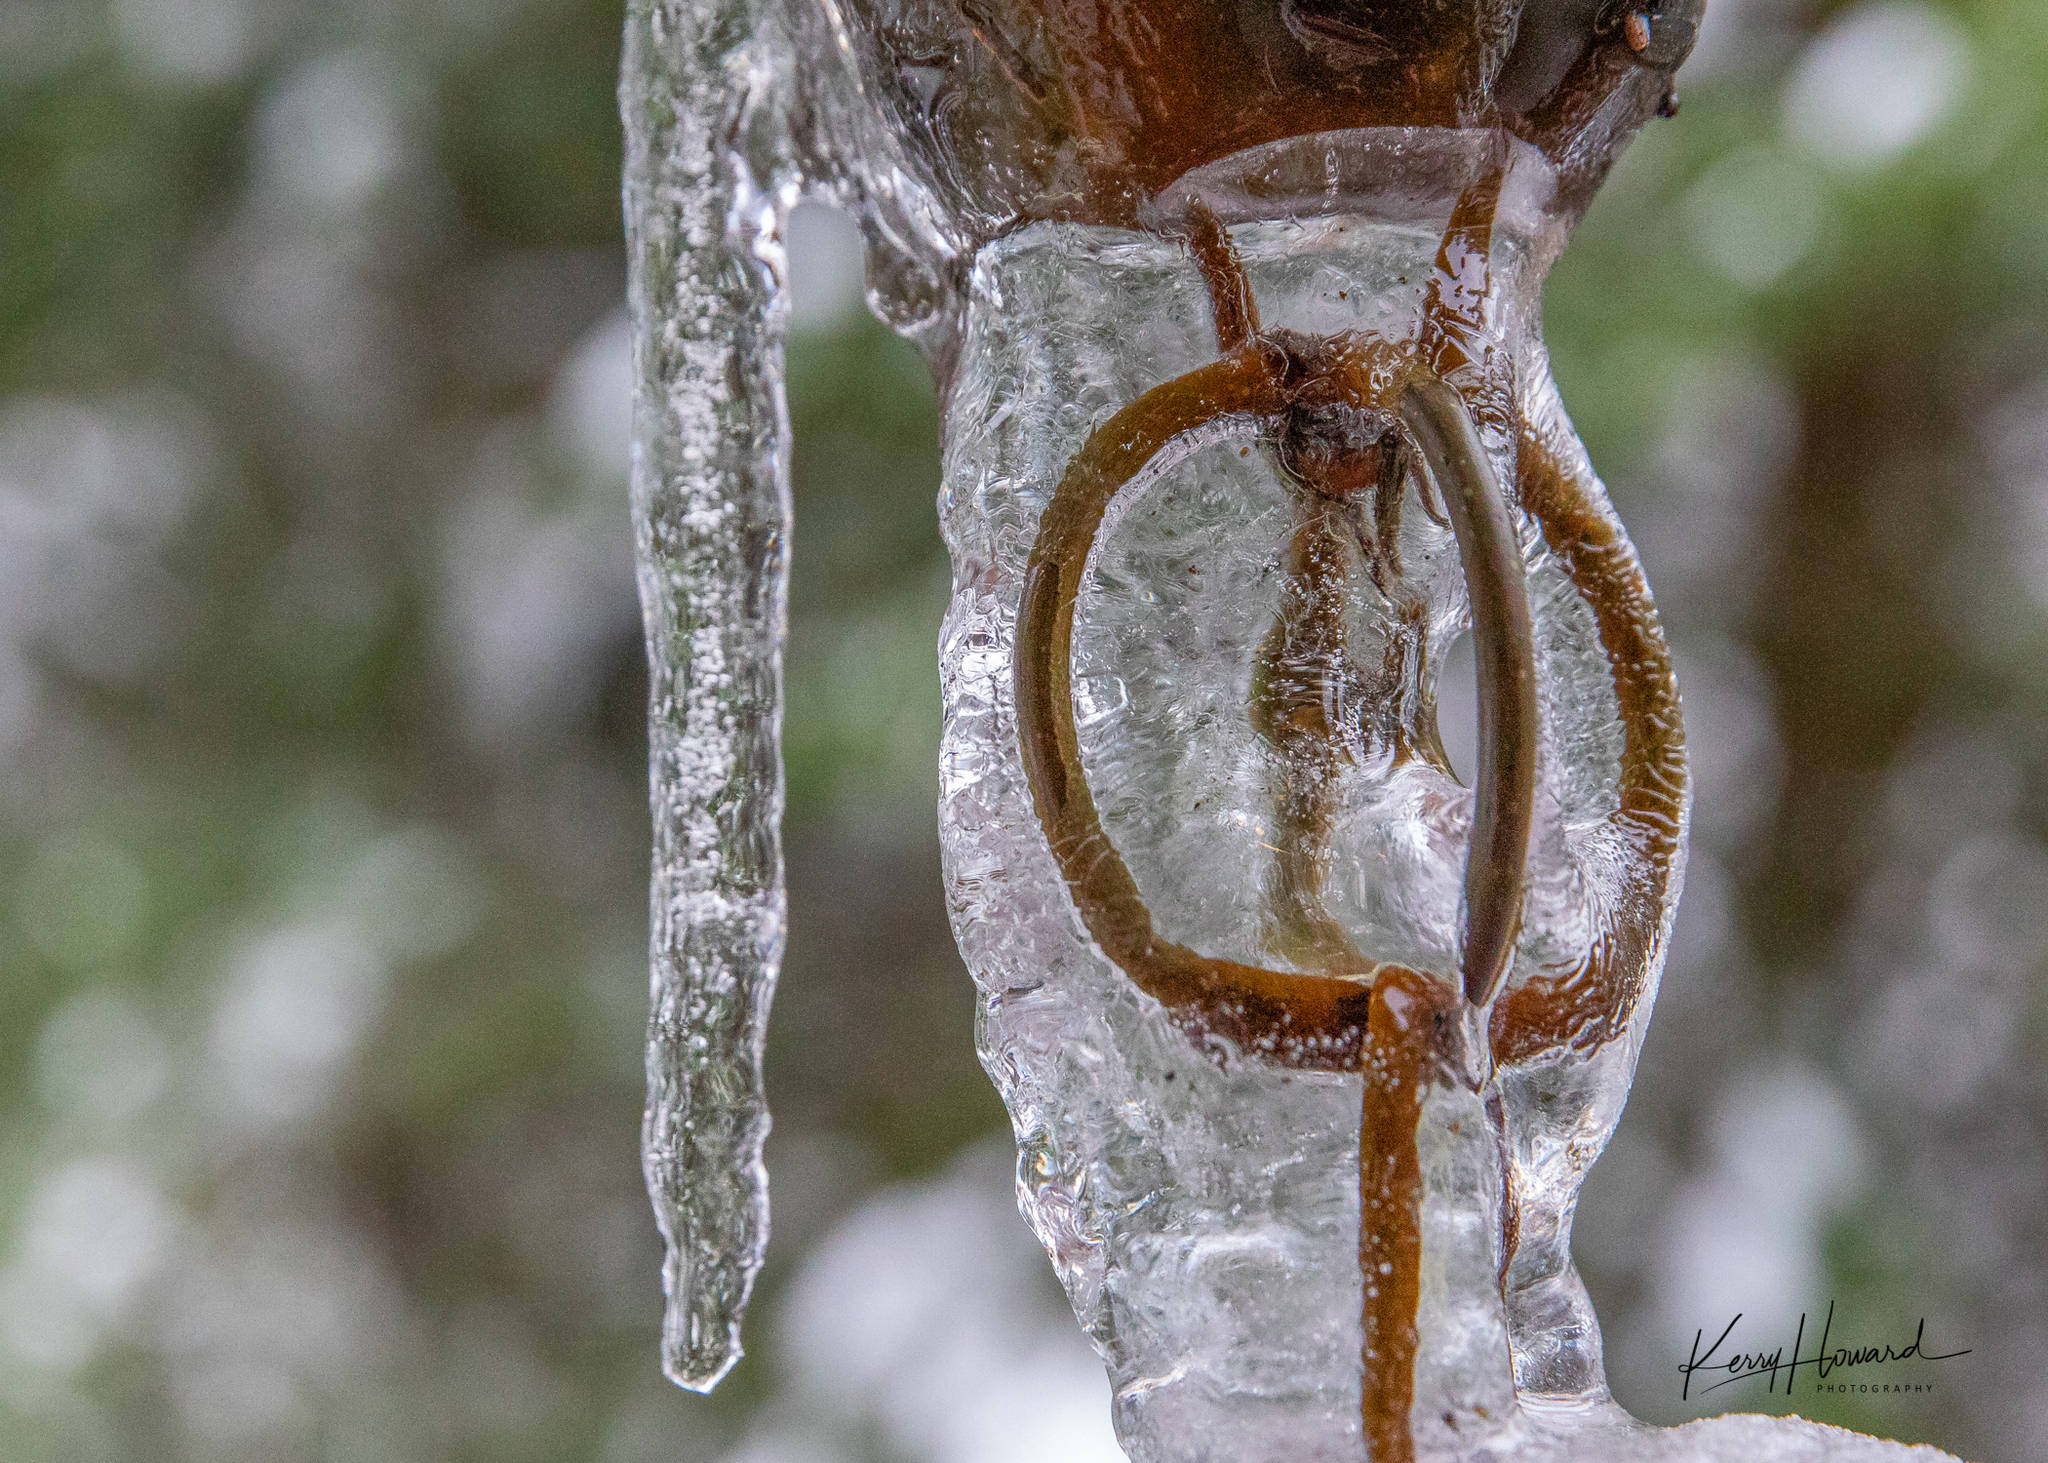 Frozen water on a chain on Christmas 2018. (Courtesy Photo | Kerry Howard)